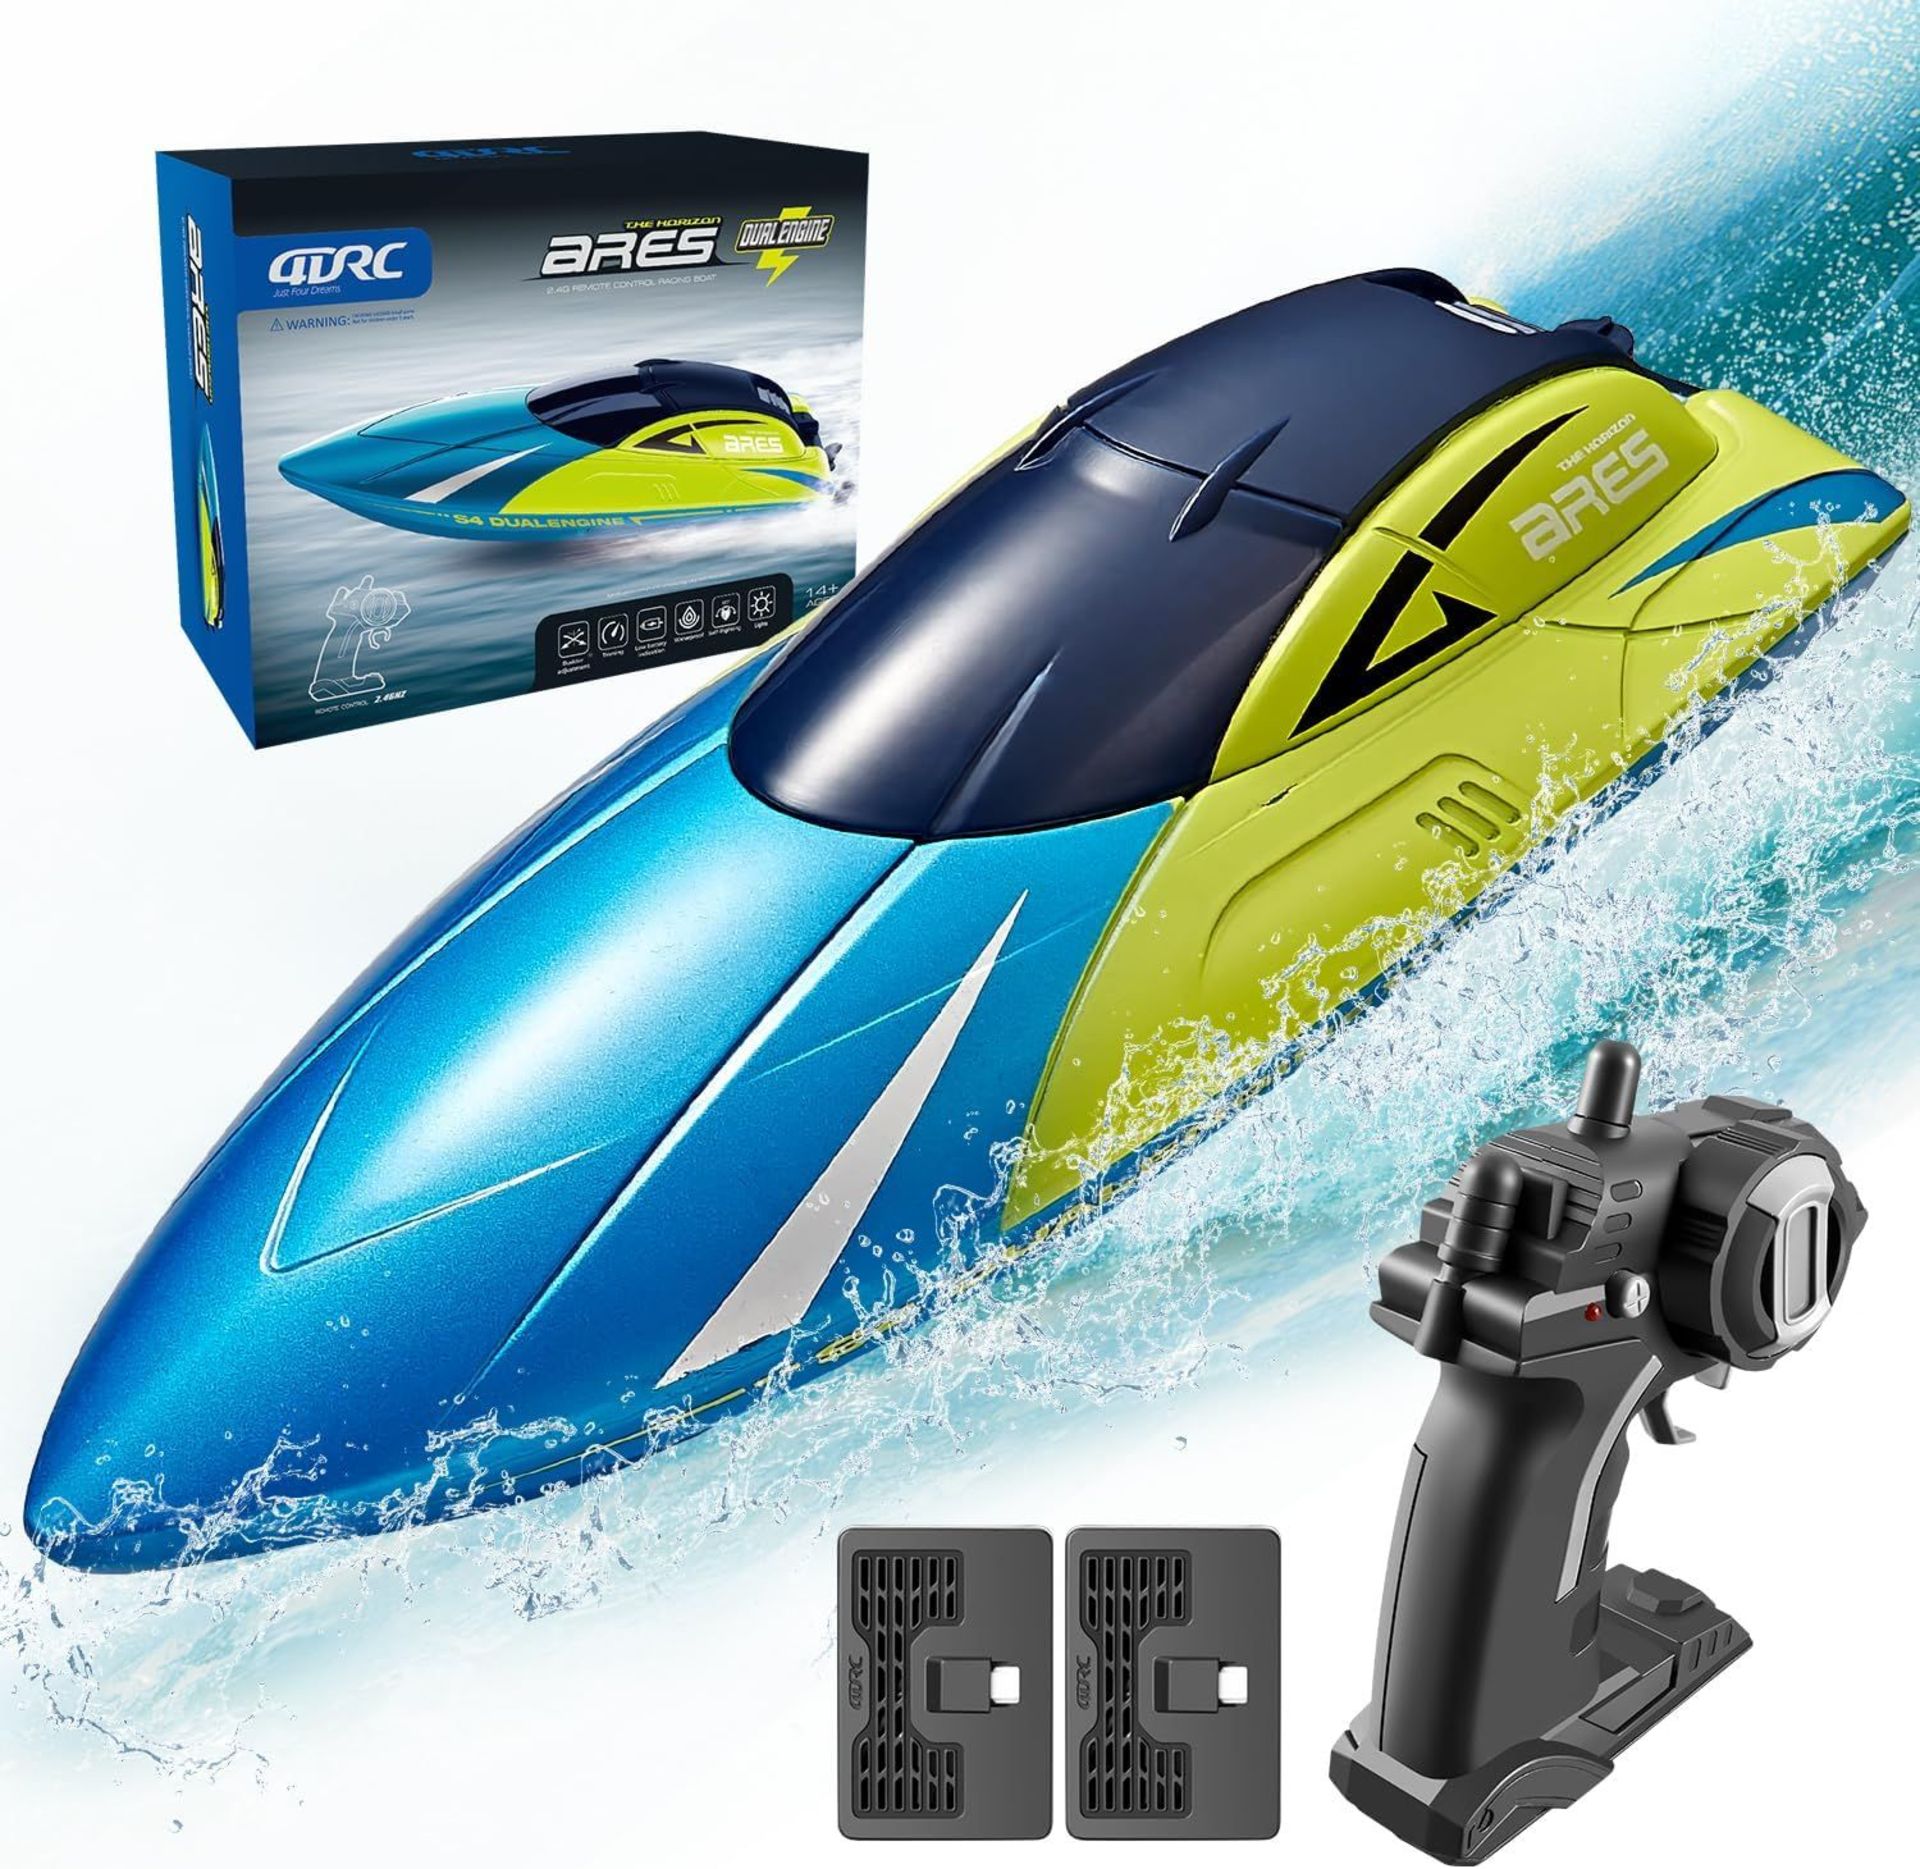 Trade lot 5 x 4DRC S4 RC Boat Remote Control Boat for Kids Adults, 20+ MPH 2.4GHz Racing Boats for